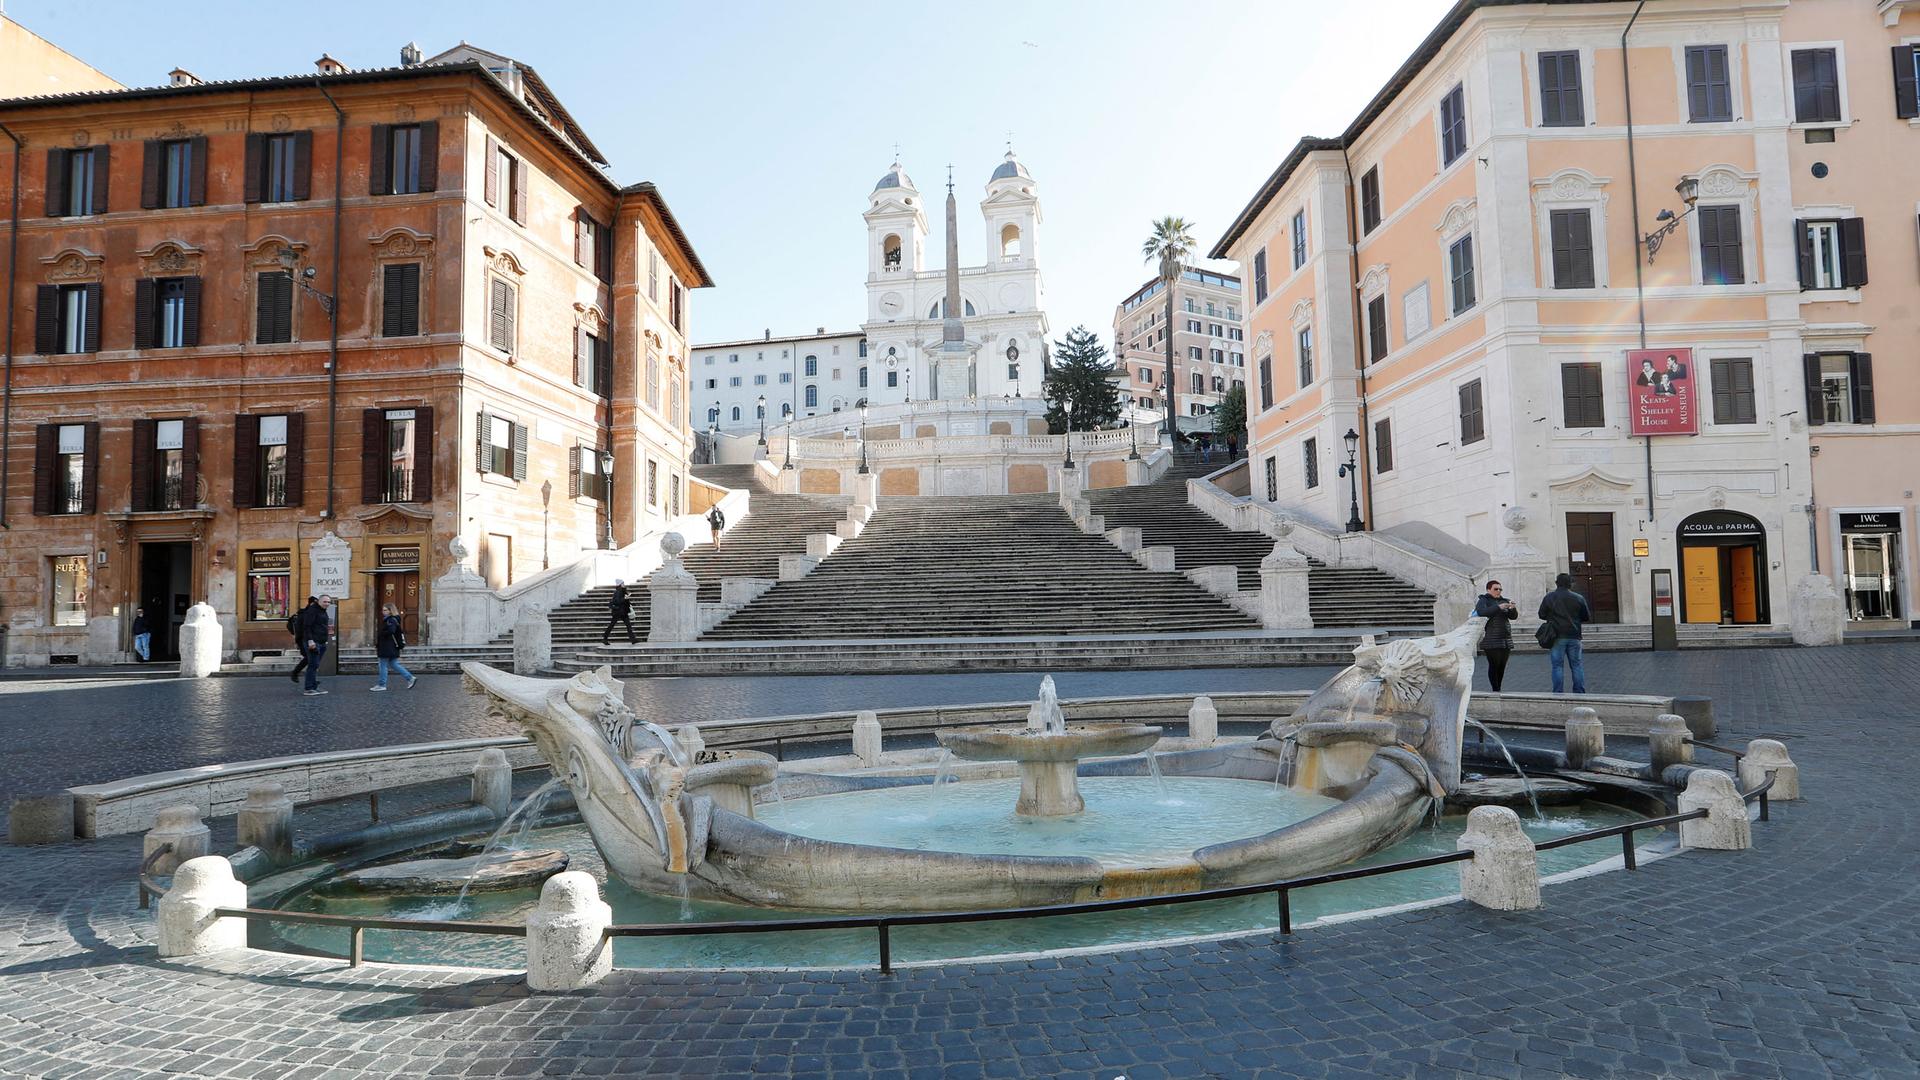 Rome's Spanish Steps are shown with a large fountain at the base.